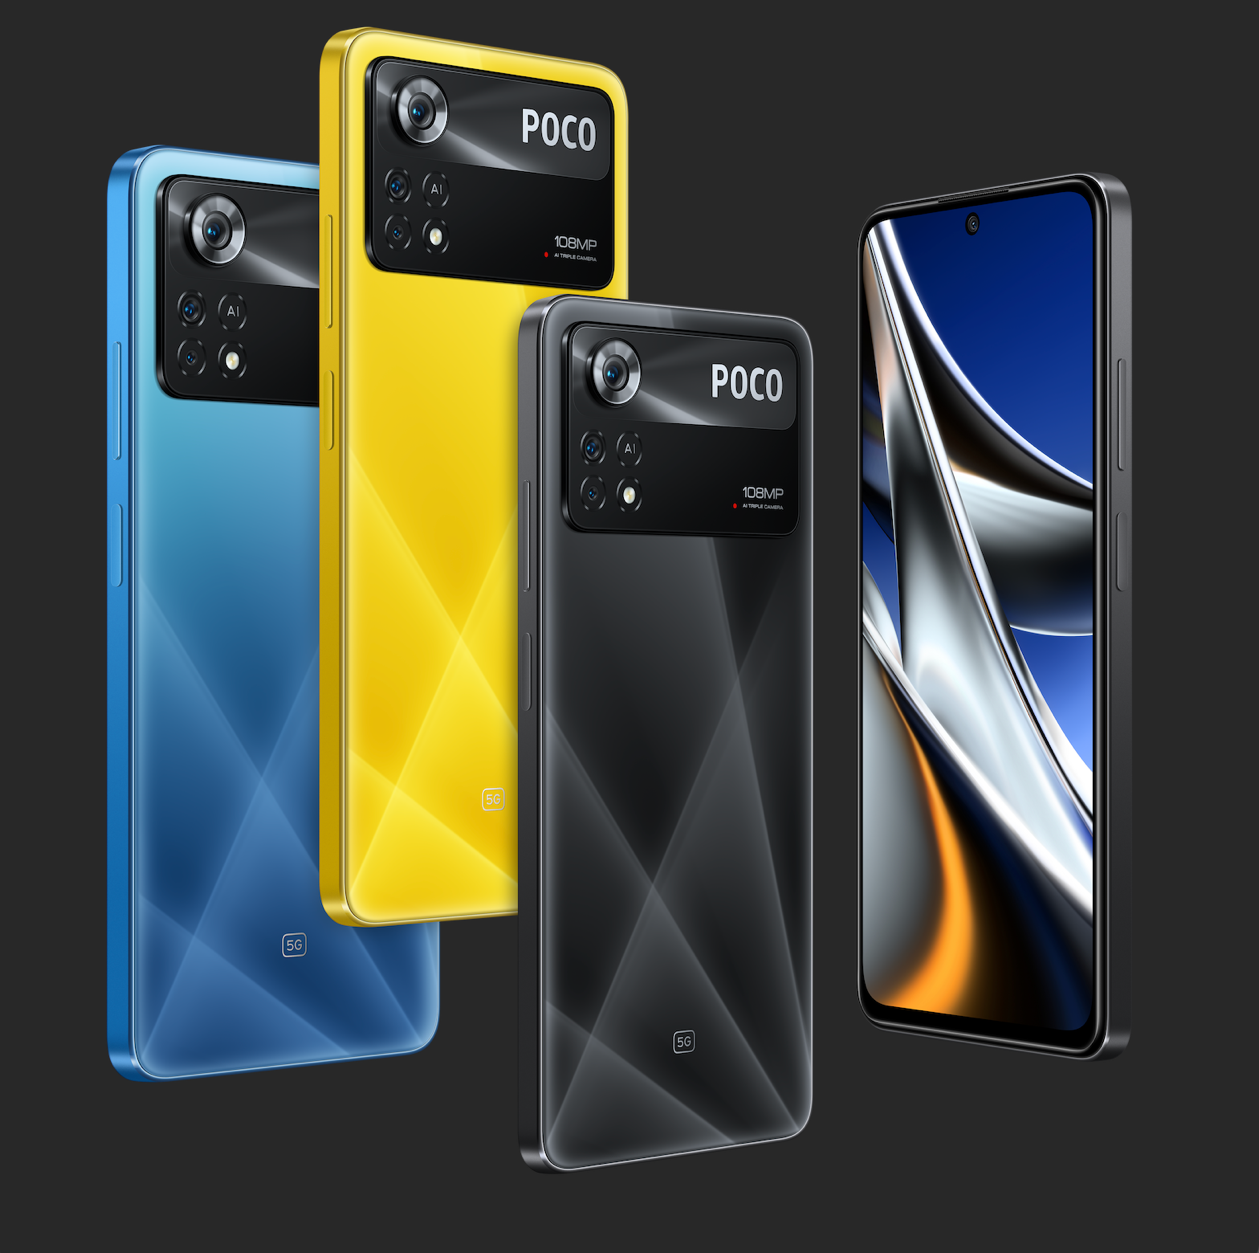 POCO’s flagship smartphones launched globally and are ready to reach Vietnamese consumers